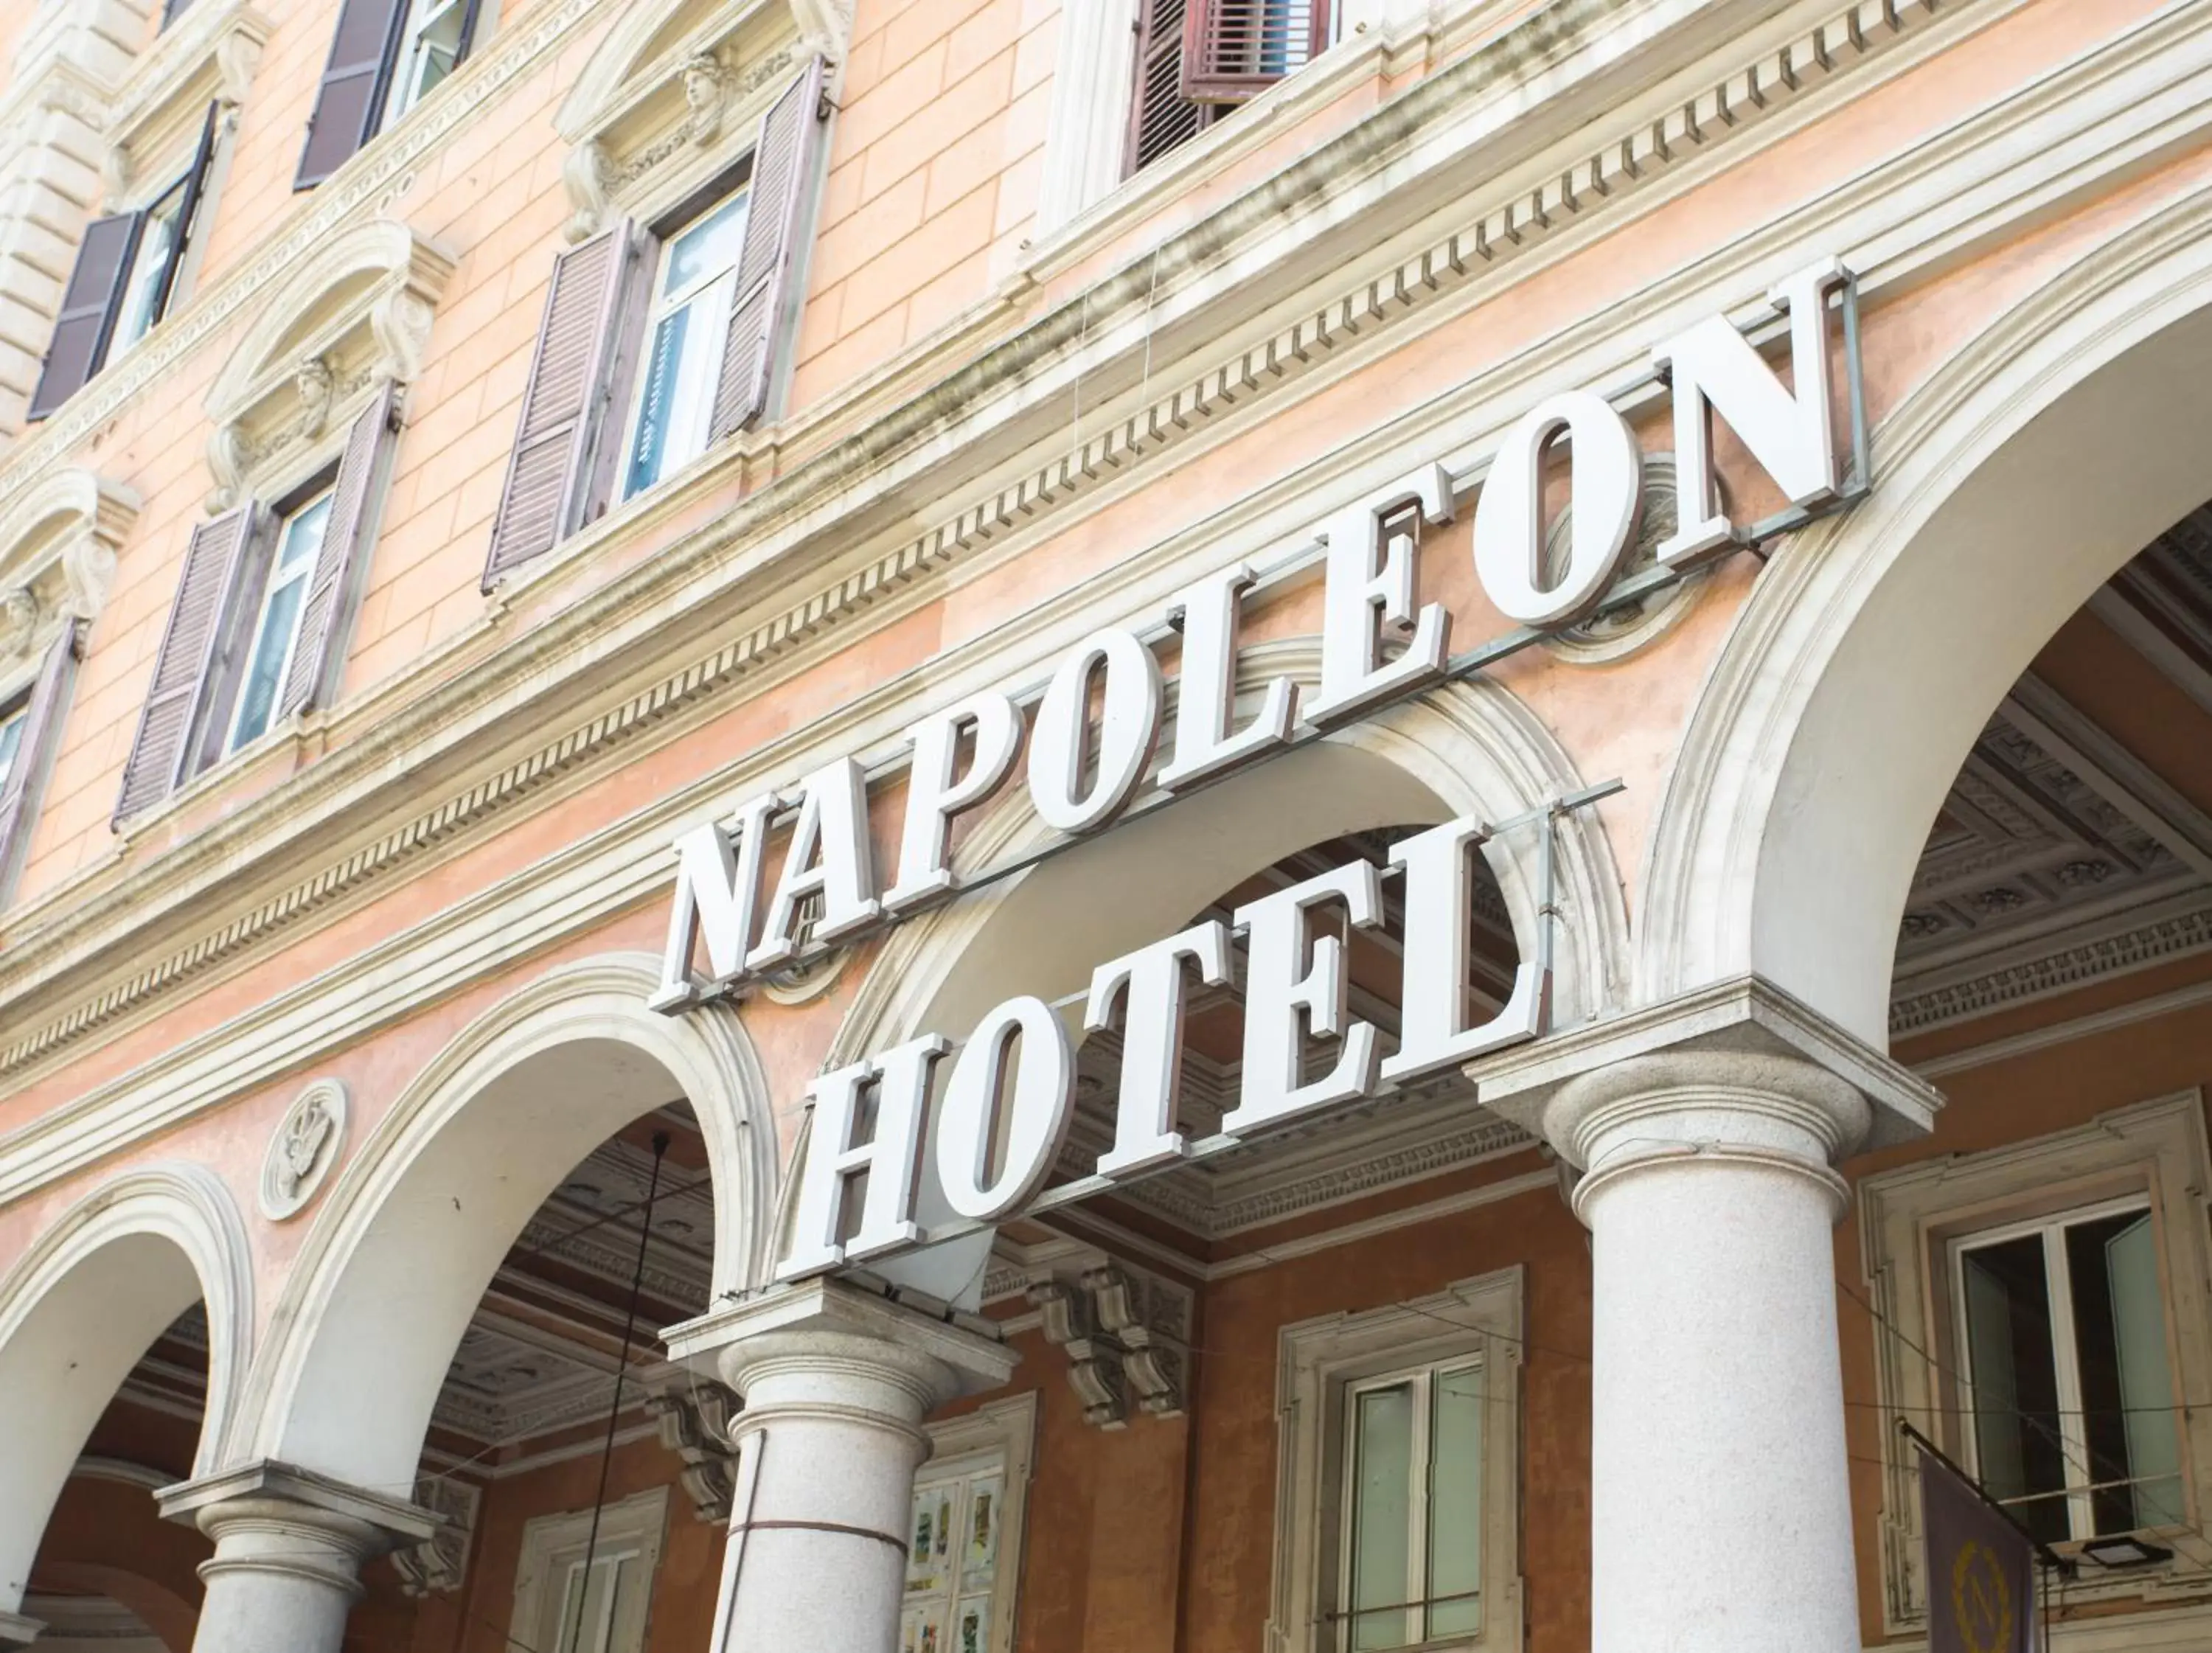 Property logo or sign in Hotel Napoleon